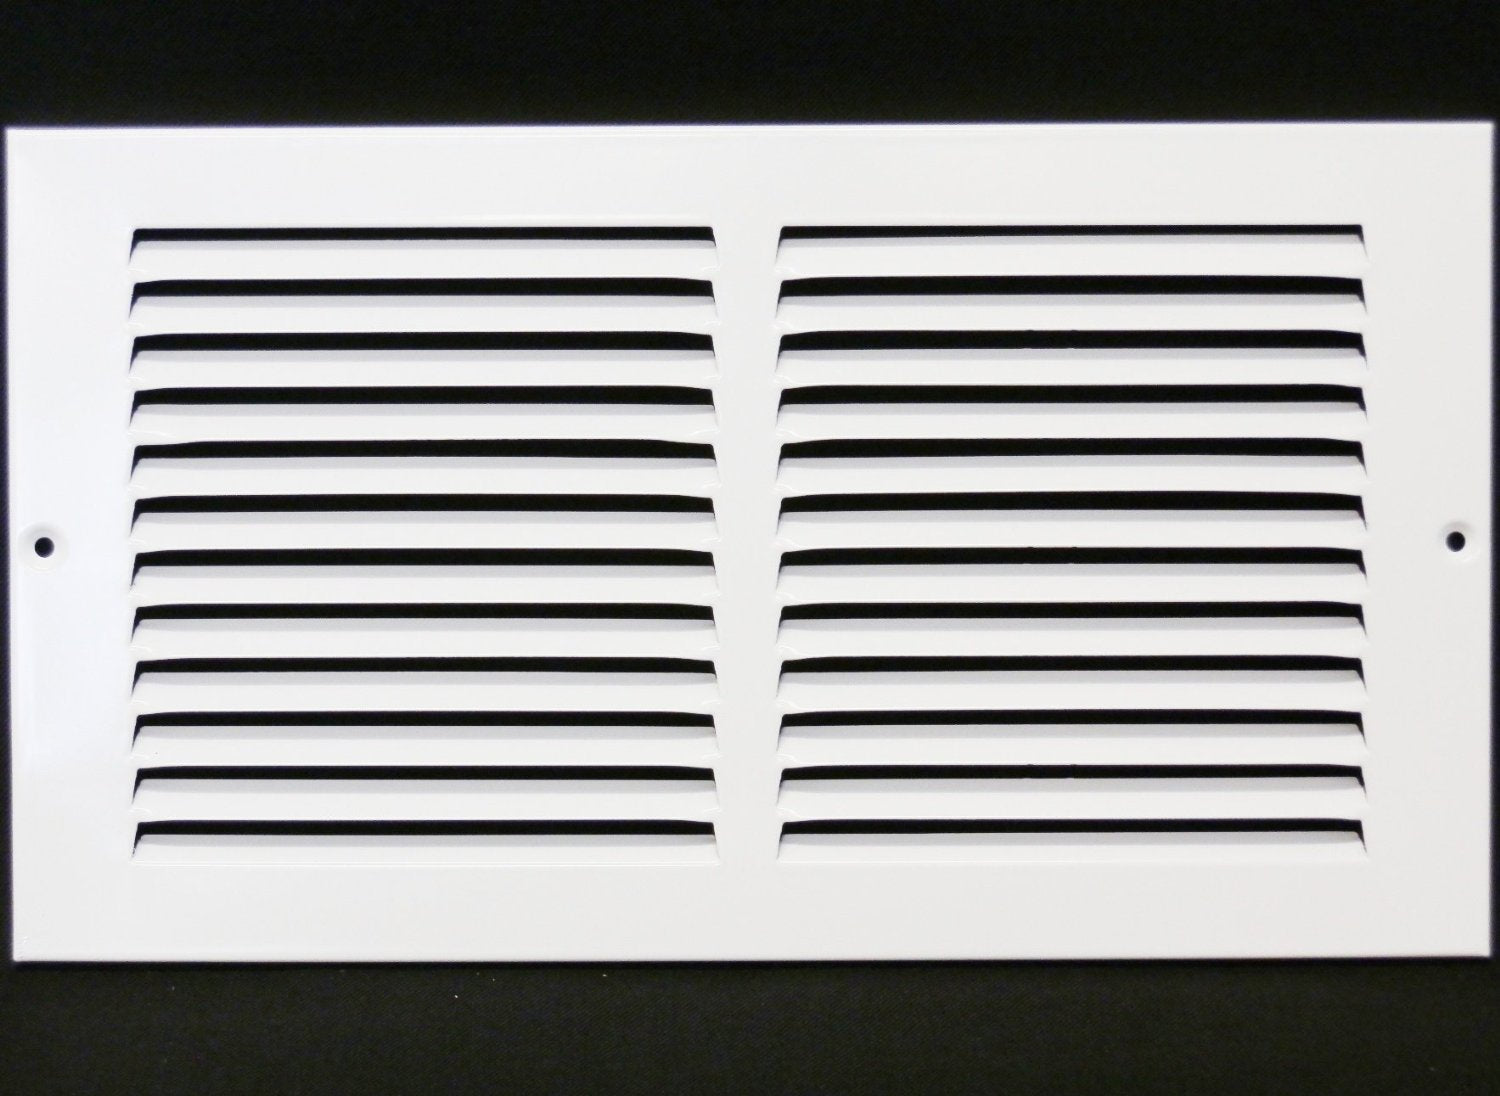 10" X 6" Air Vent Return Grilles - Sidewall and Ceiling - Steel